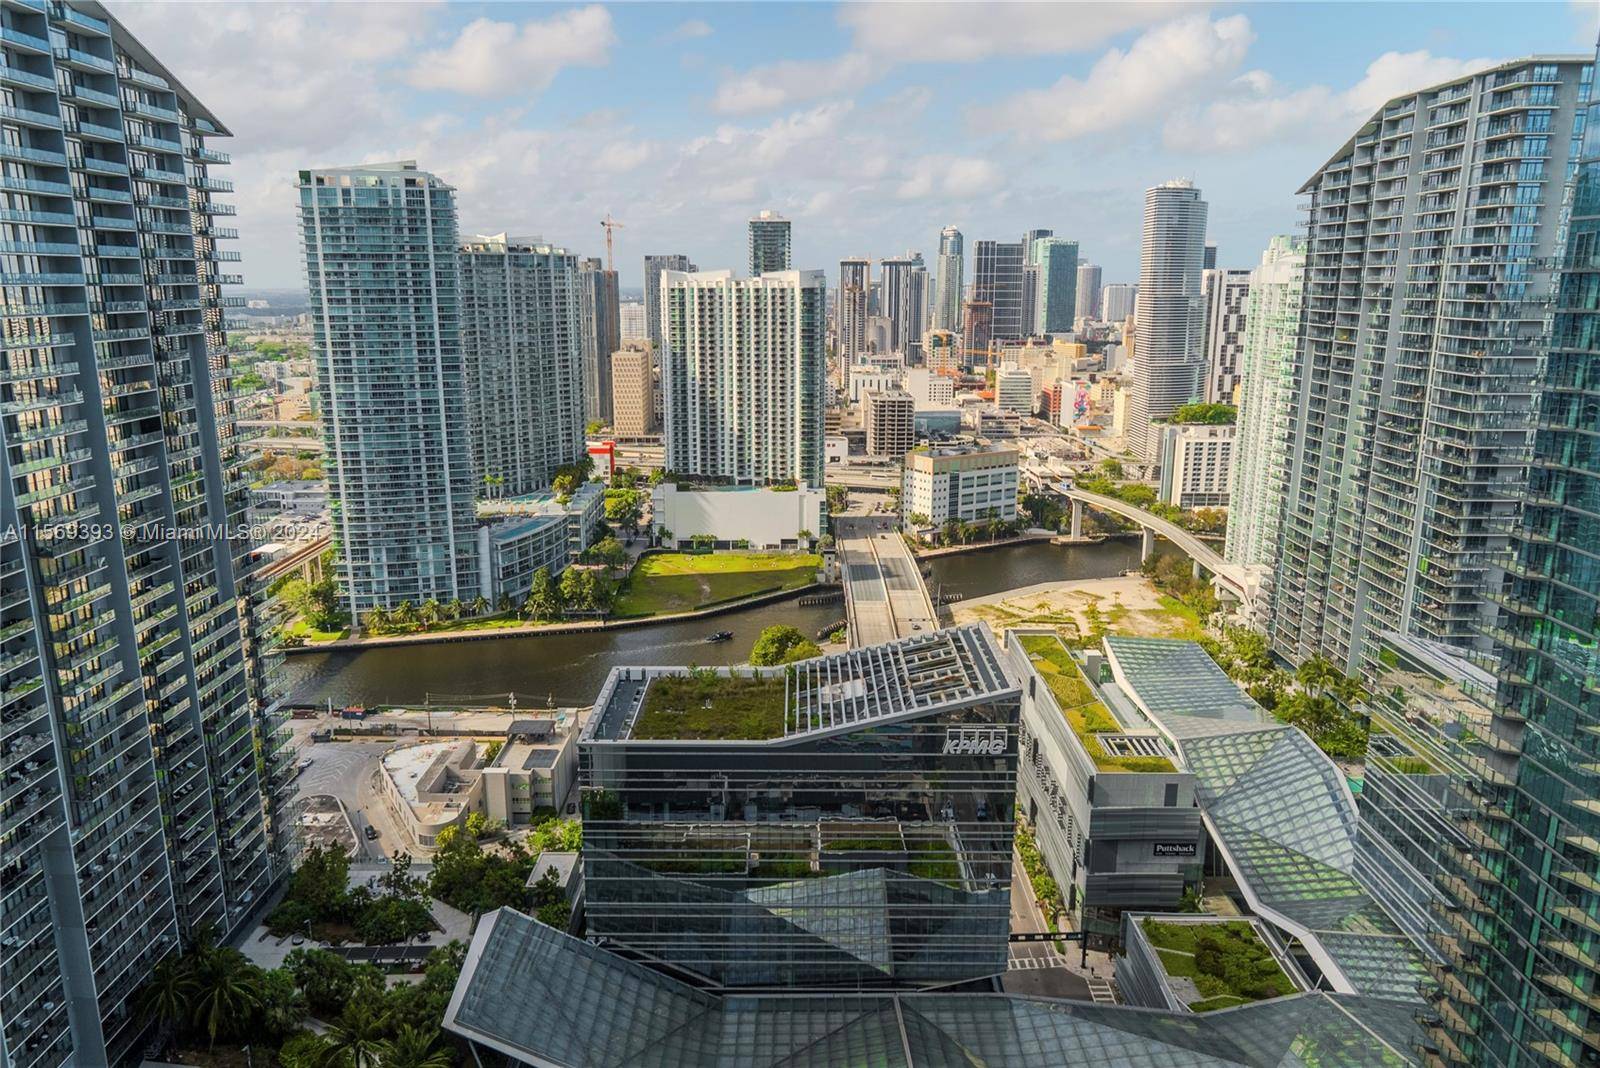 Brickell Heights is located next to Brickell City Center, surrounded by cafes, restaurants, and shops.